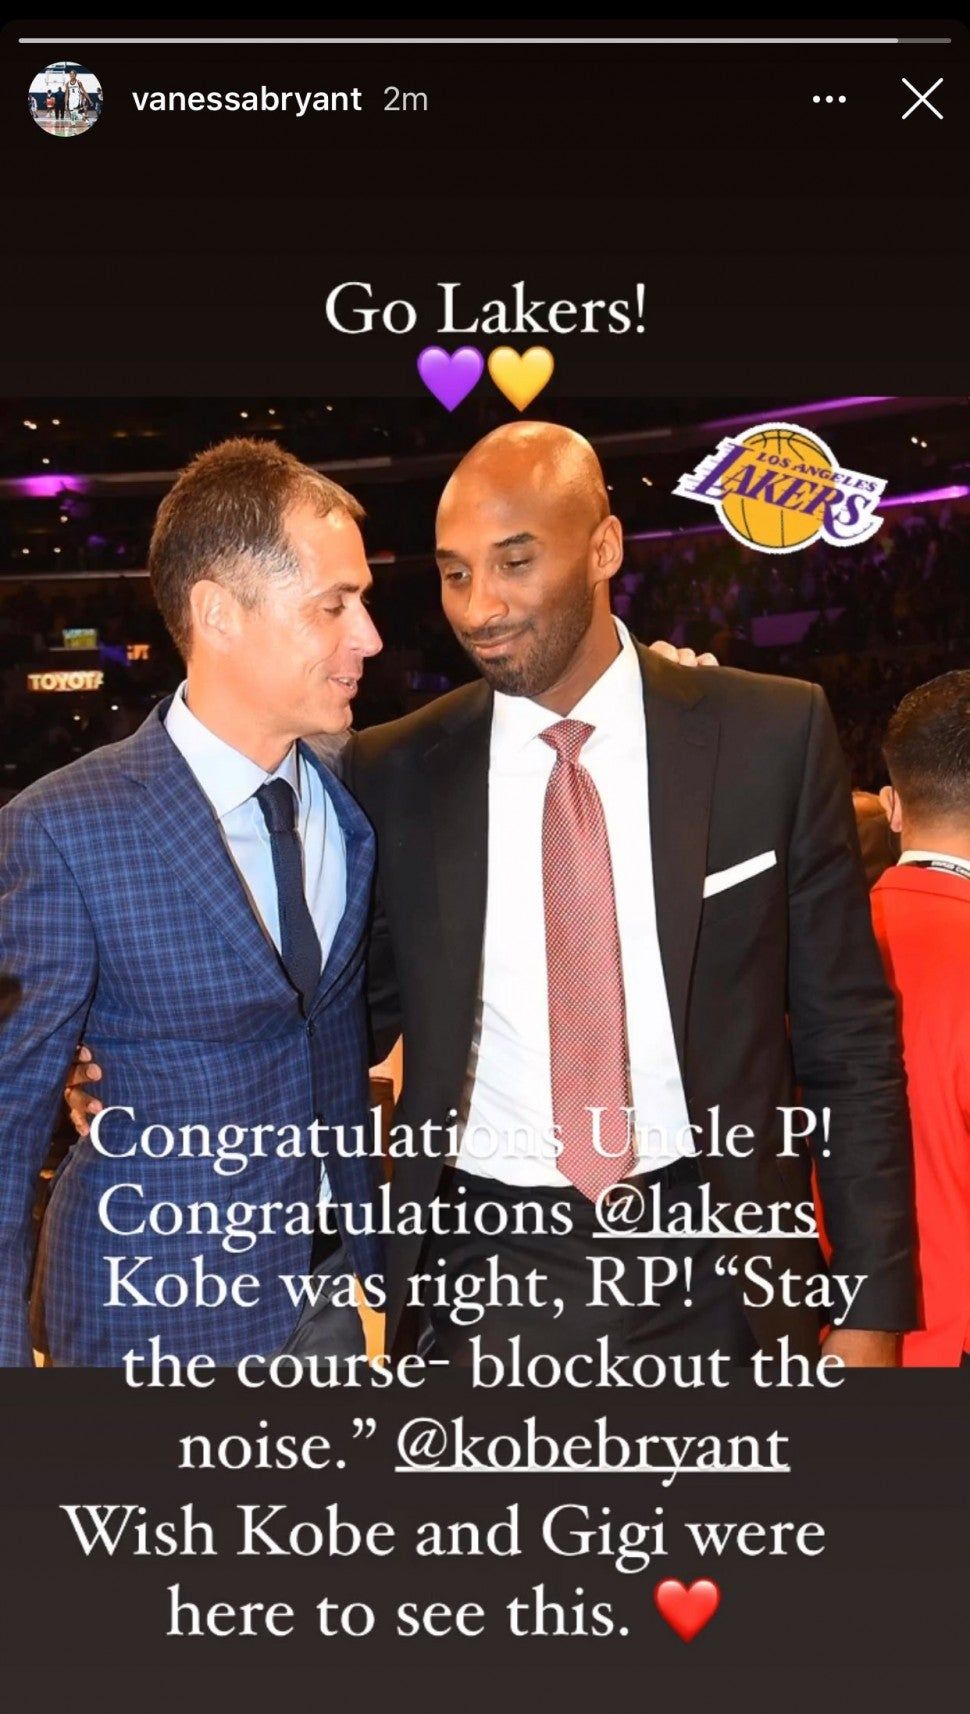 vanessa bryant's instagram congratulating the lakers on their nba win